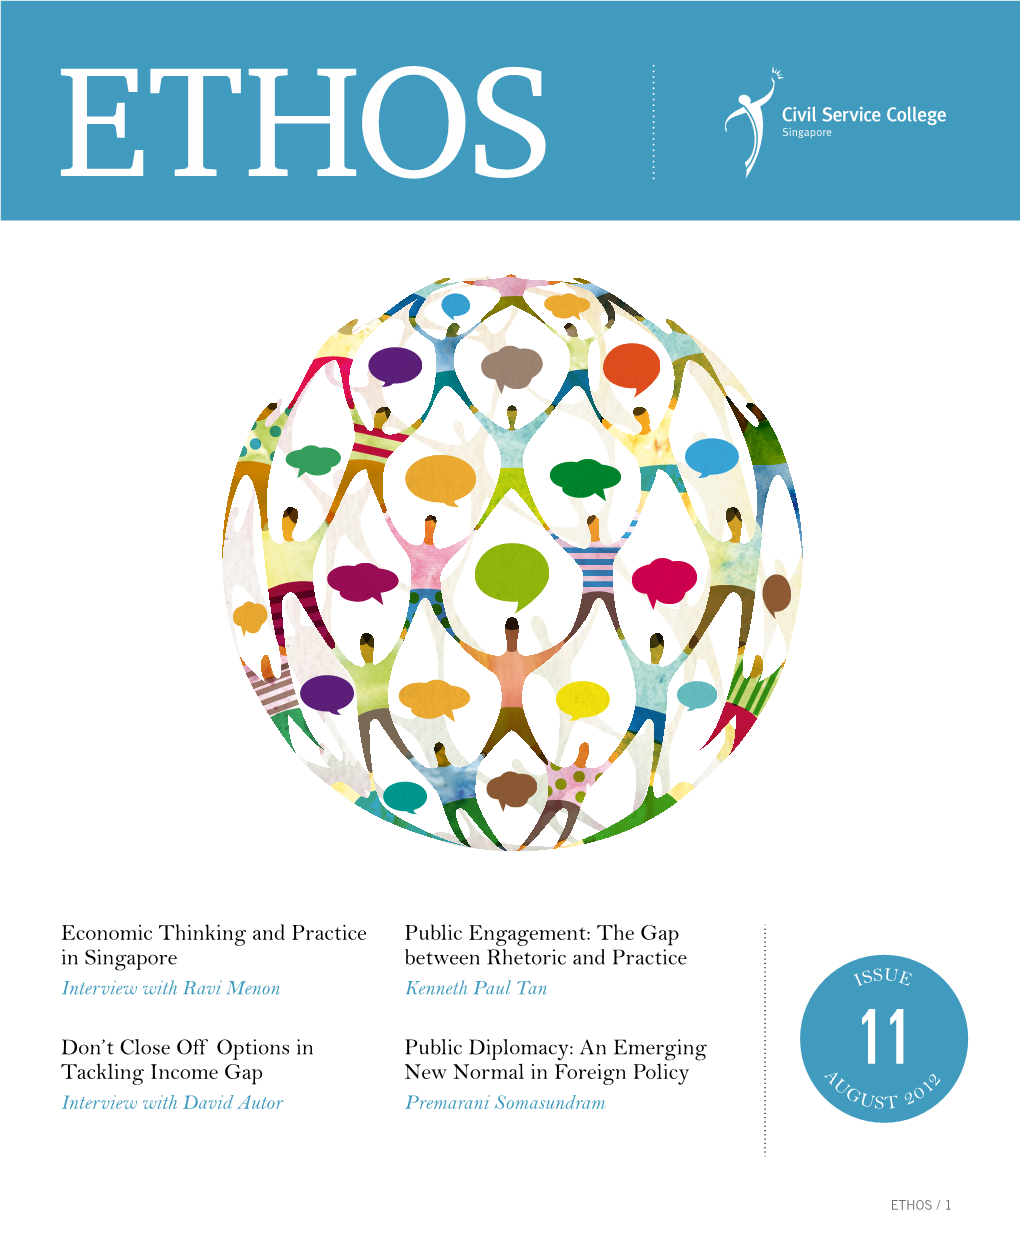 ETHOS / 1 2 / Ethos Is a Biannual Publication of the Centre for Governance and Leadership, Civil Service College